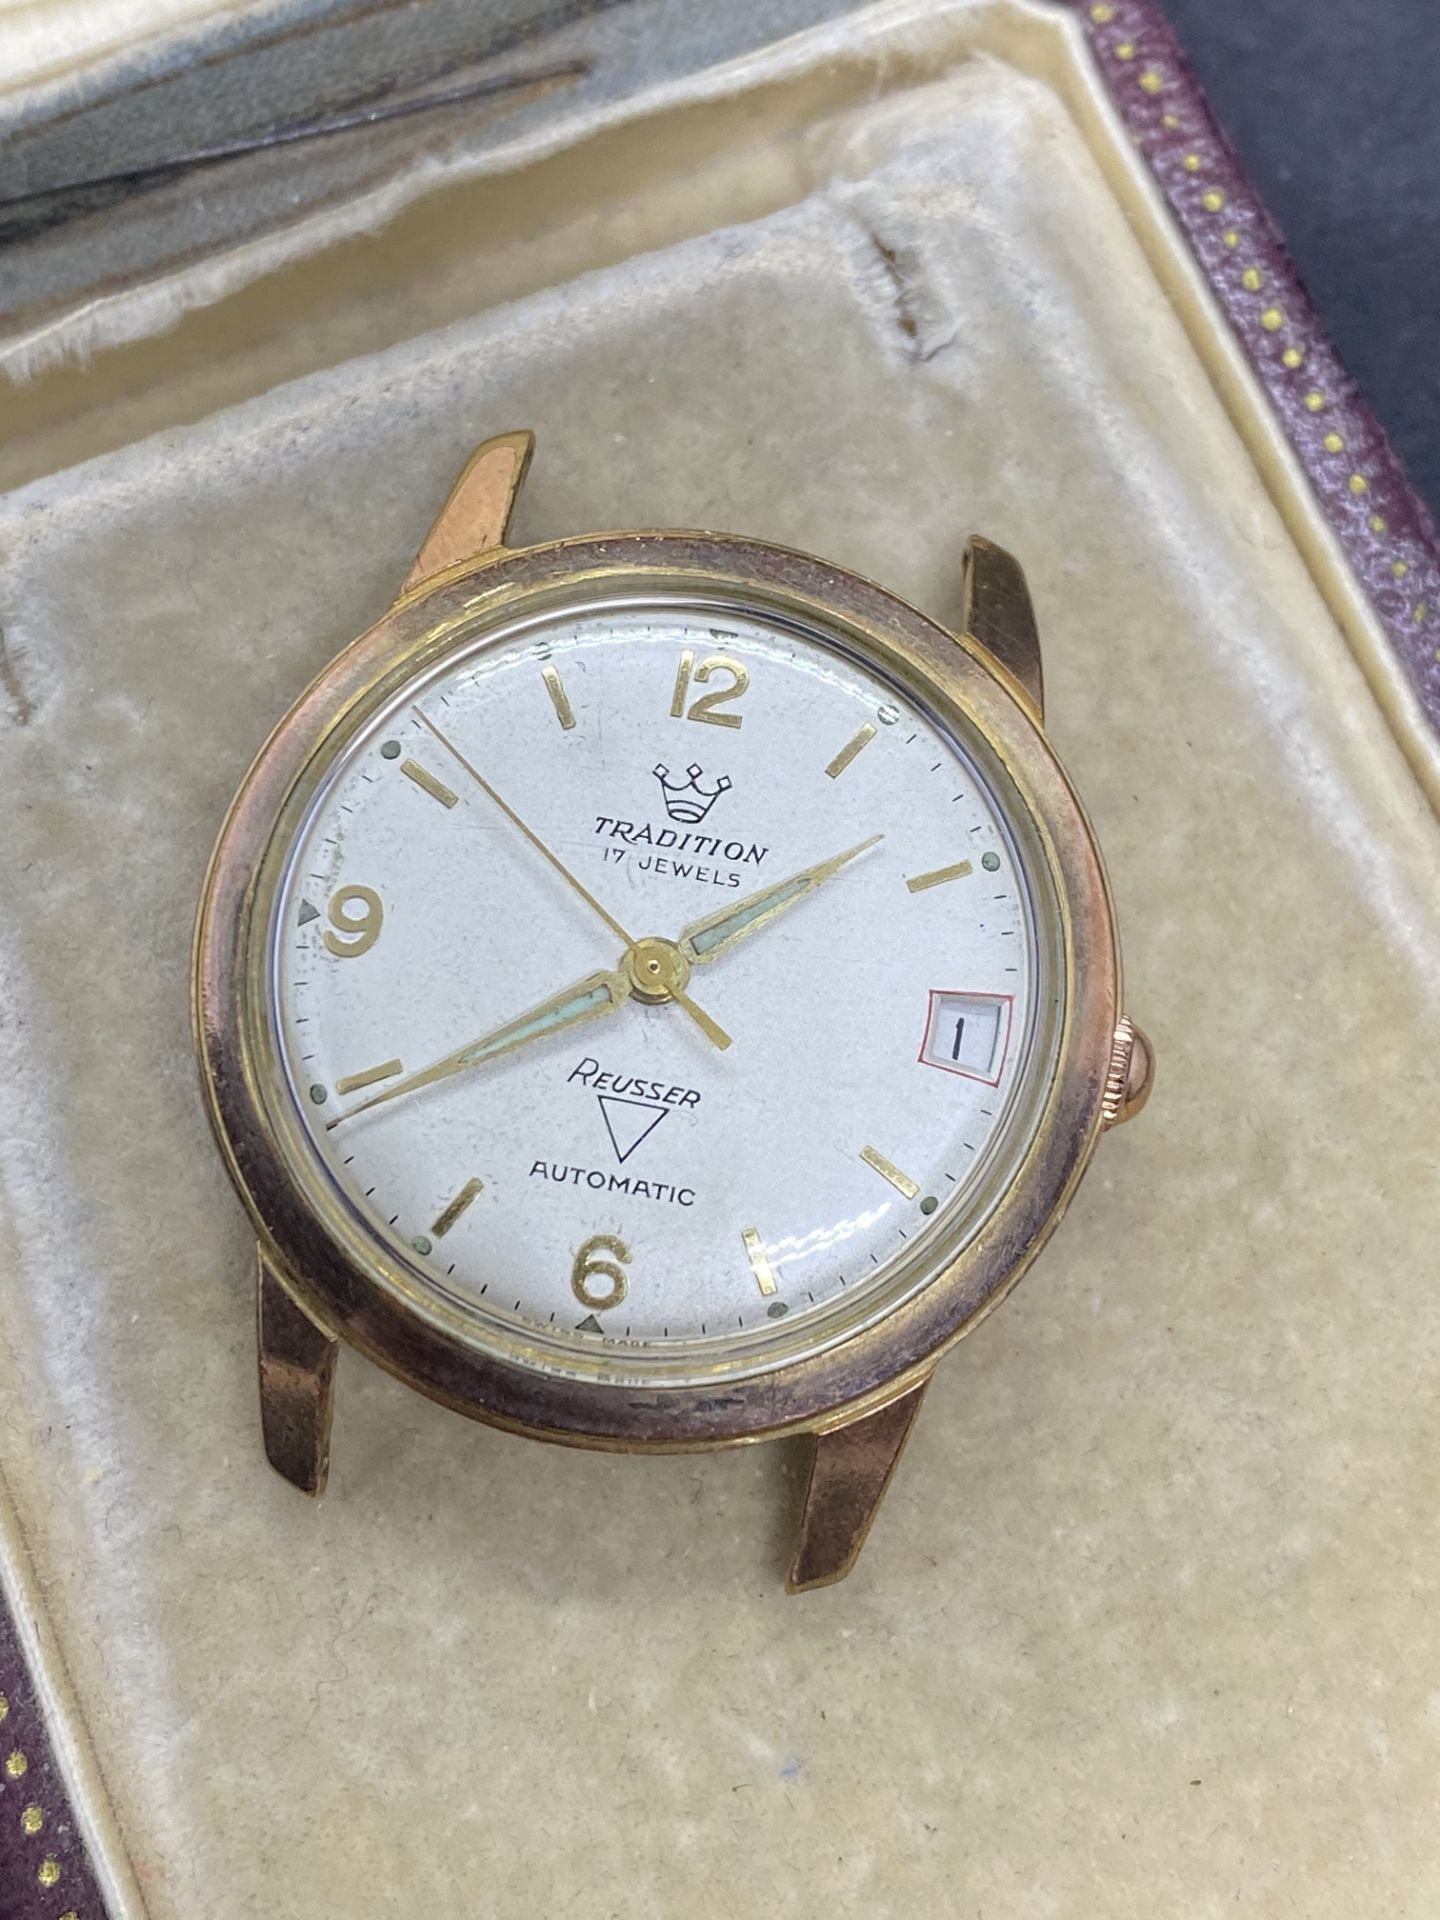 TRADITION 17 JEWELS REUSSER AUTOMATIC WATCH - Image 2 of 3